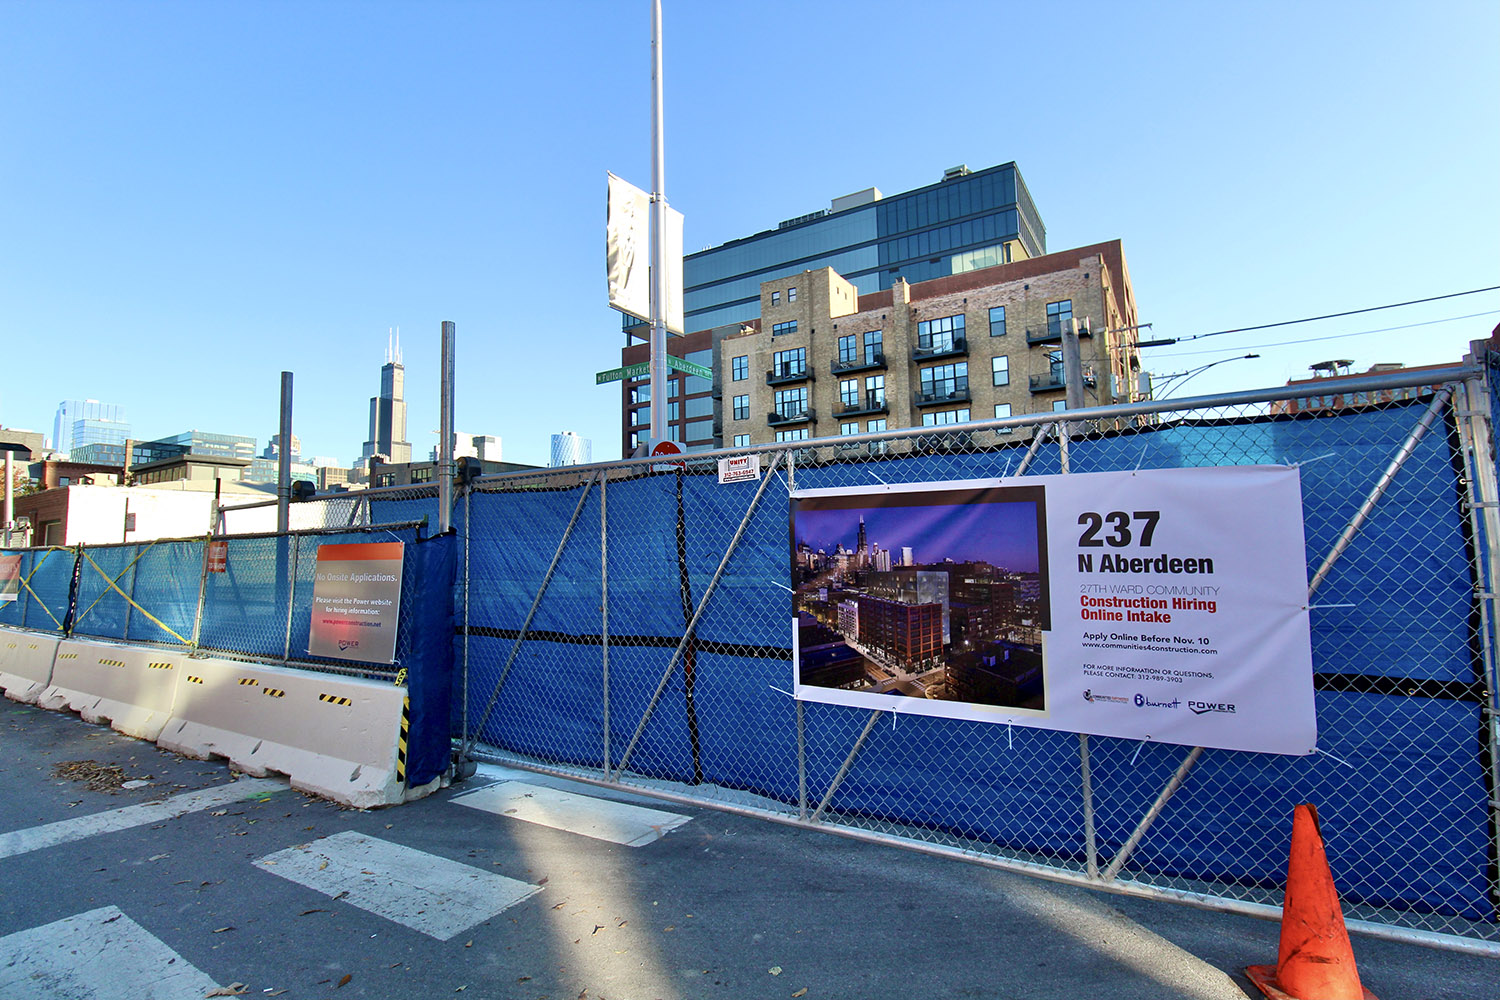 Construction Fence In Place at 237 N Aberdeen Street. Image by Jack Crawford